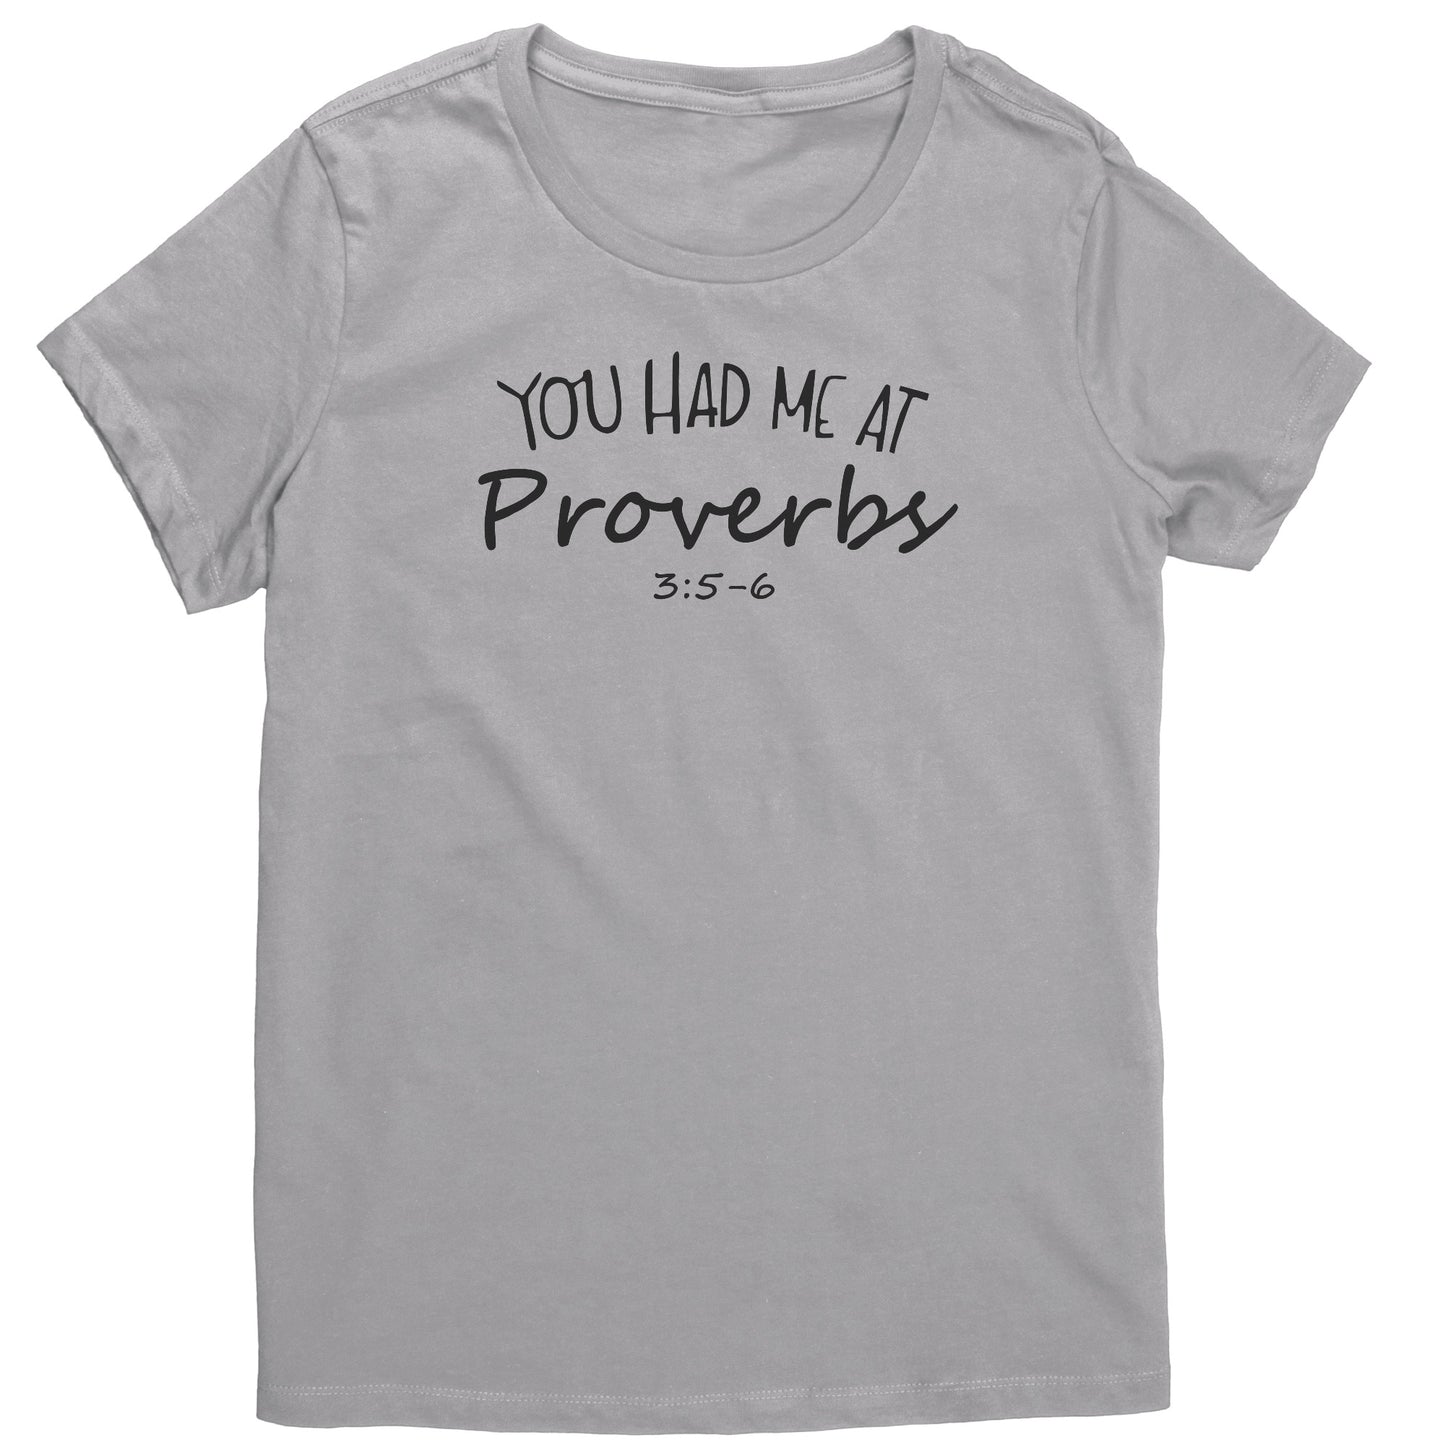 You Had Me At Proverbs 3:5-6 Women's T-Shirt Part 1